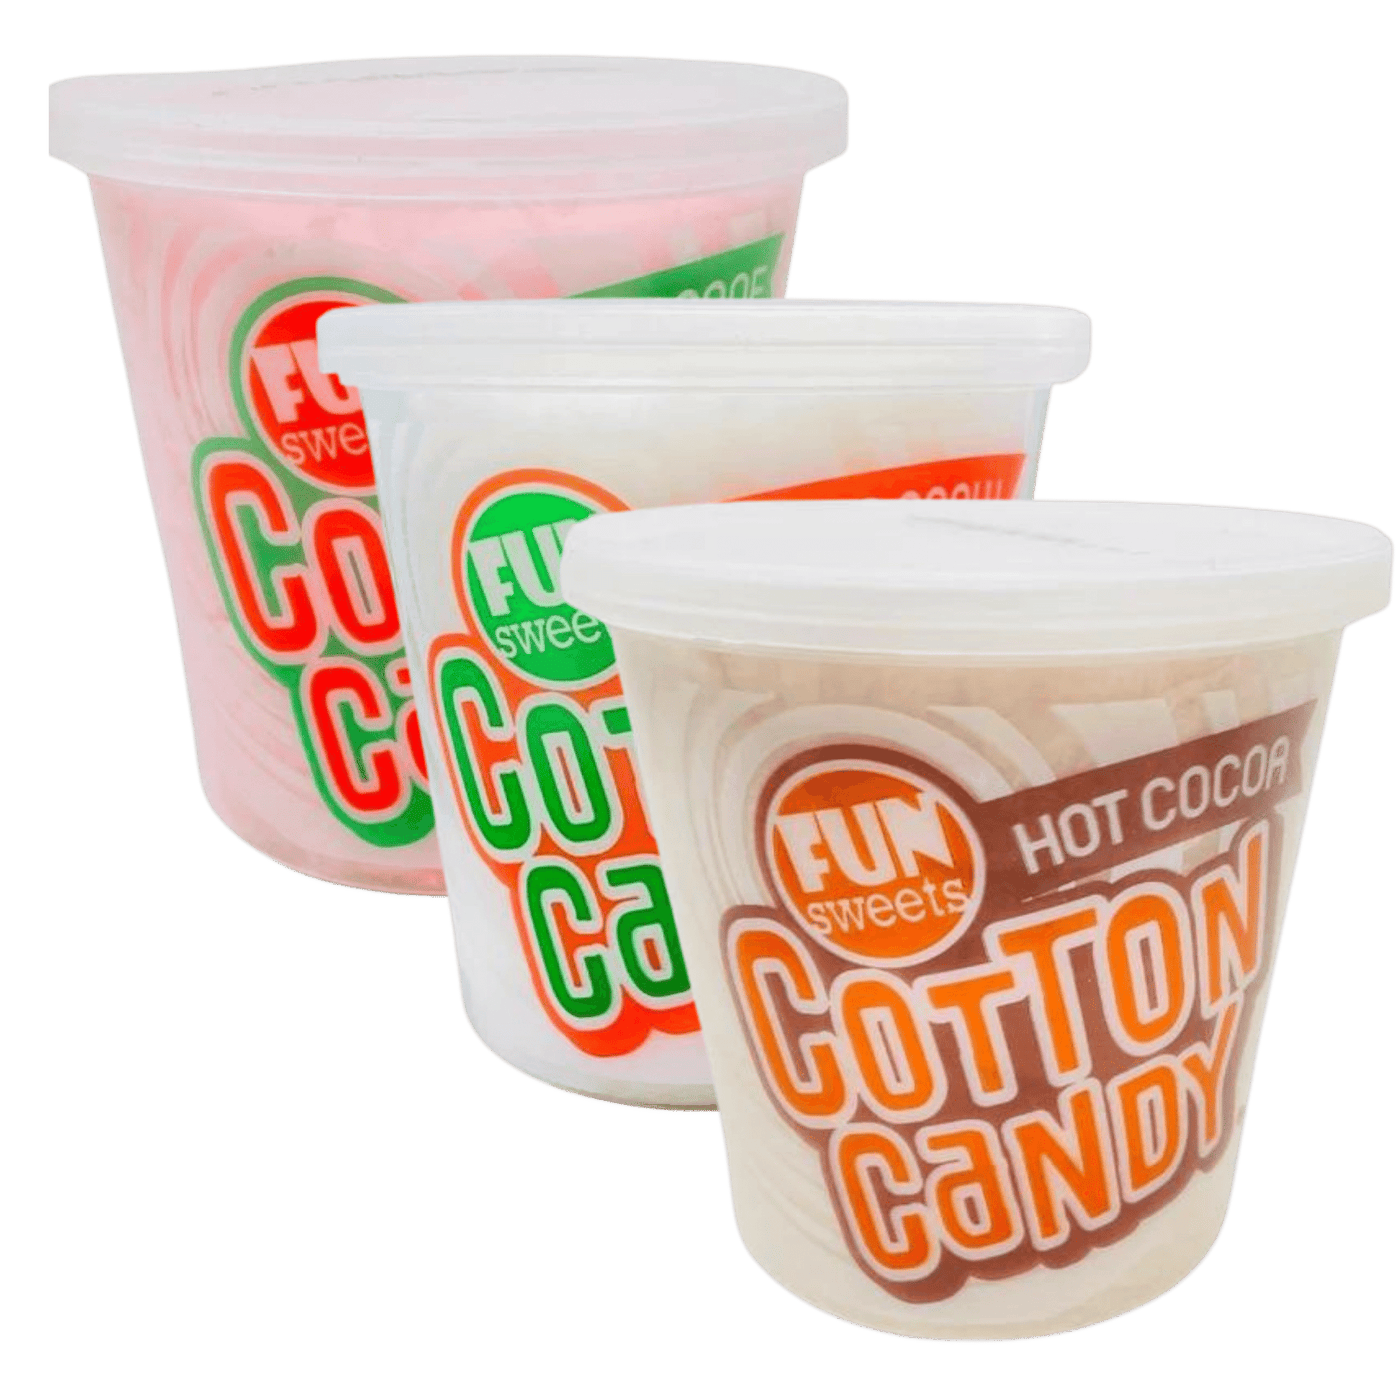 Fun Sweets Cotton Candy - Christmas